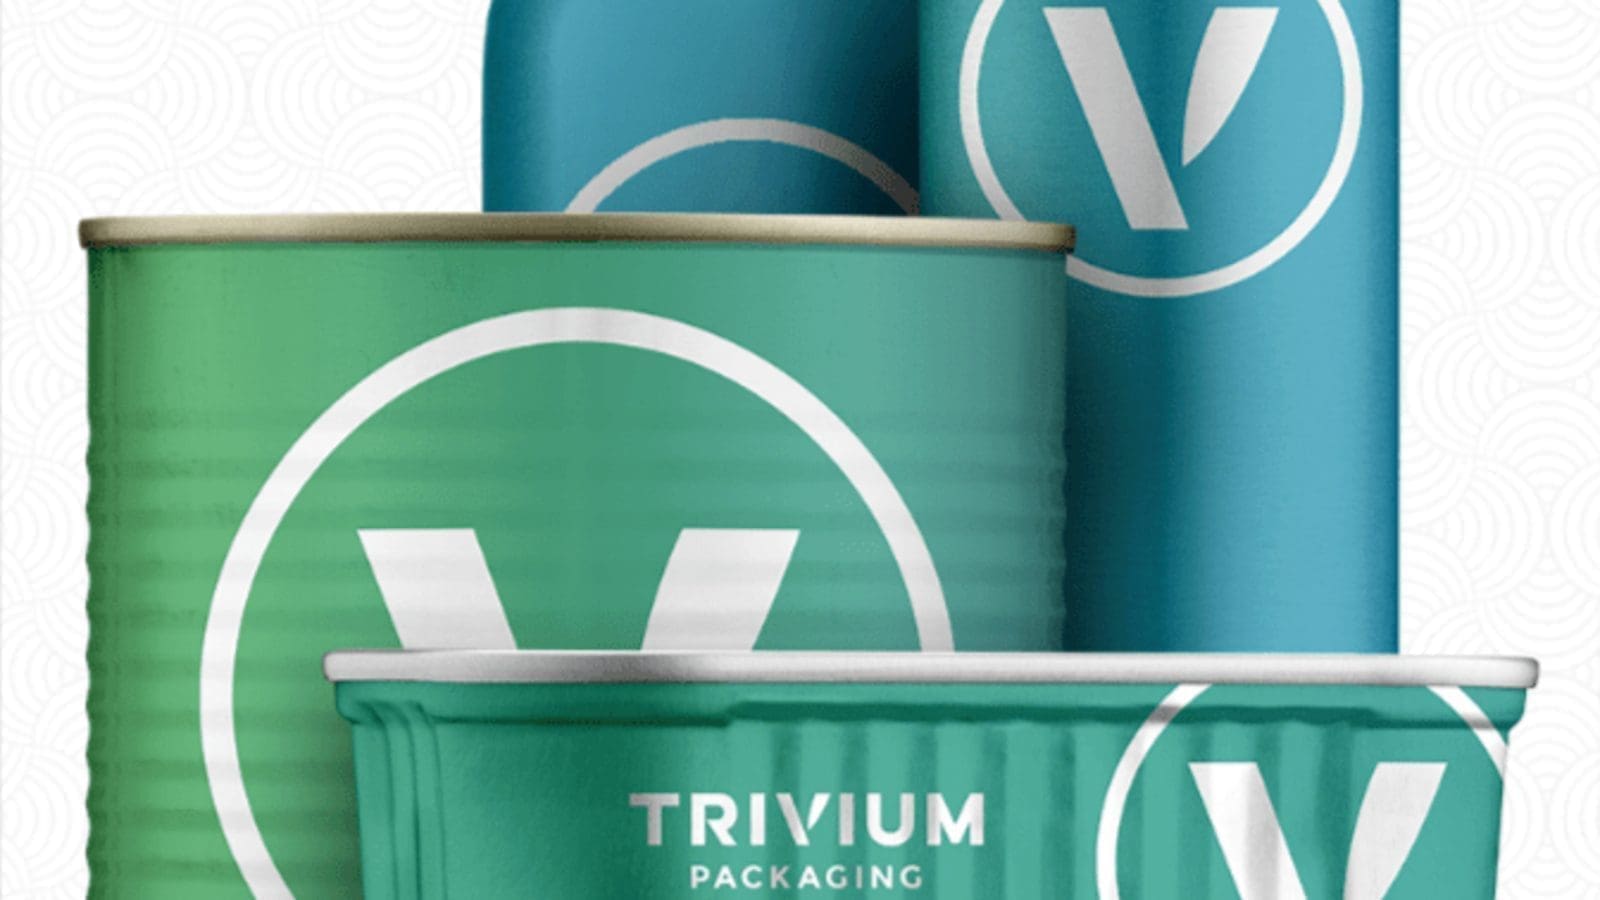 Younger consumers drive demand for sustainable packaging, express willingness to pay more